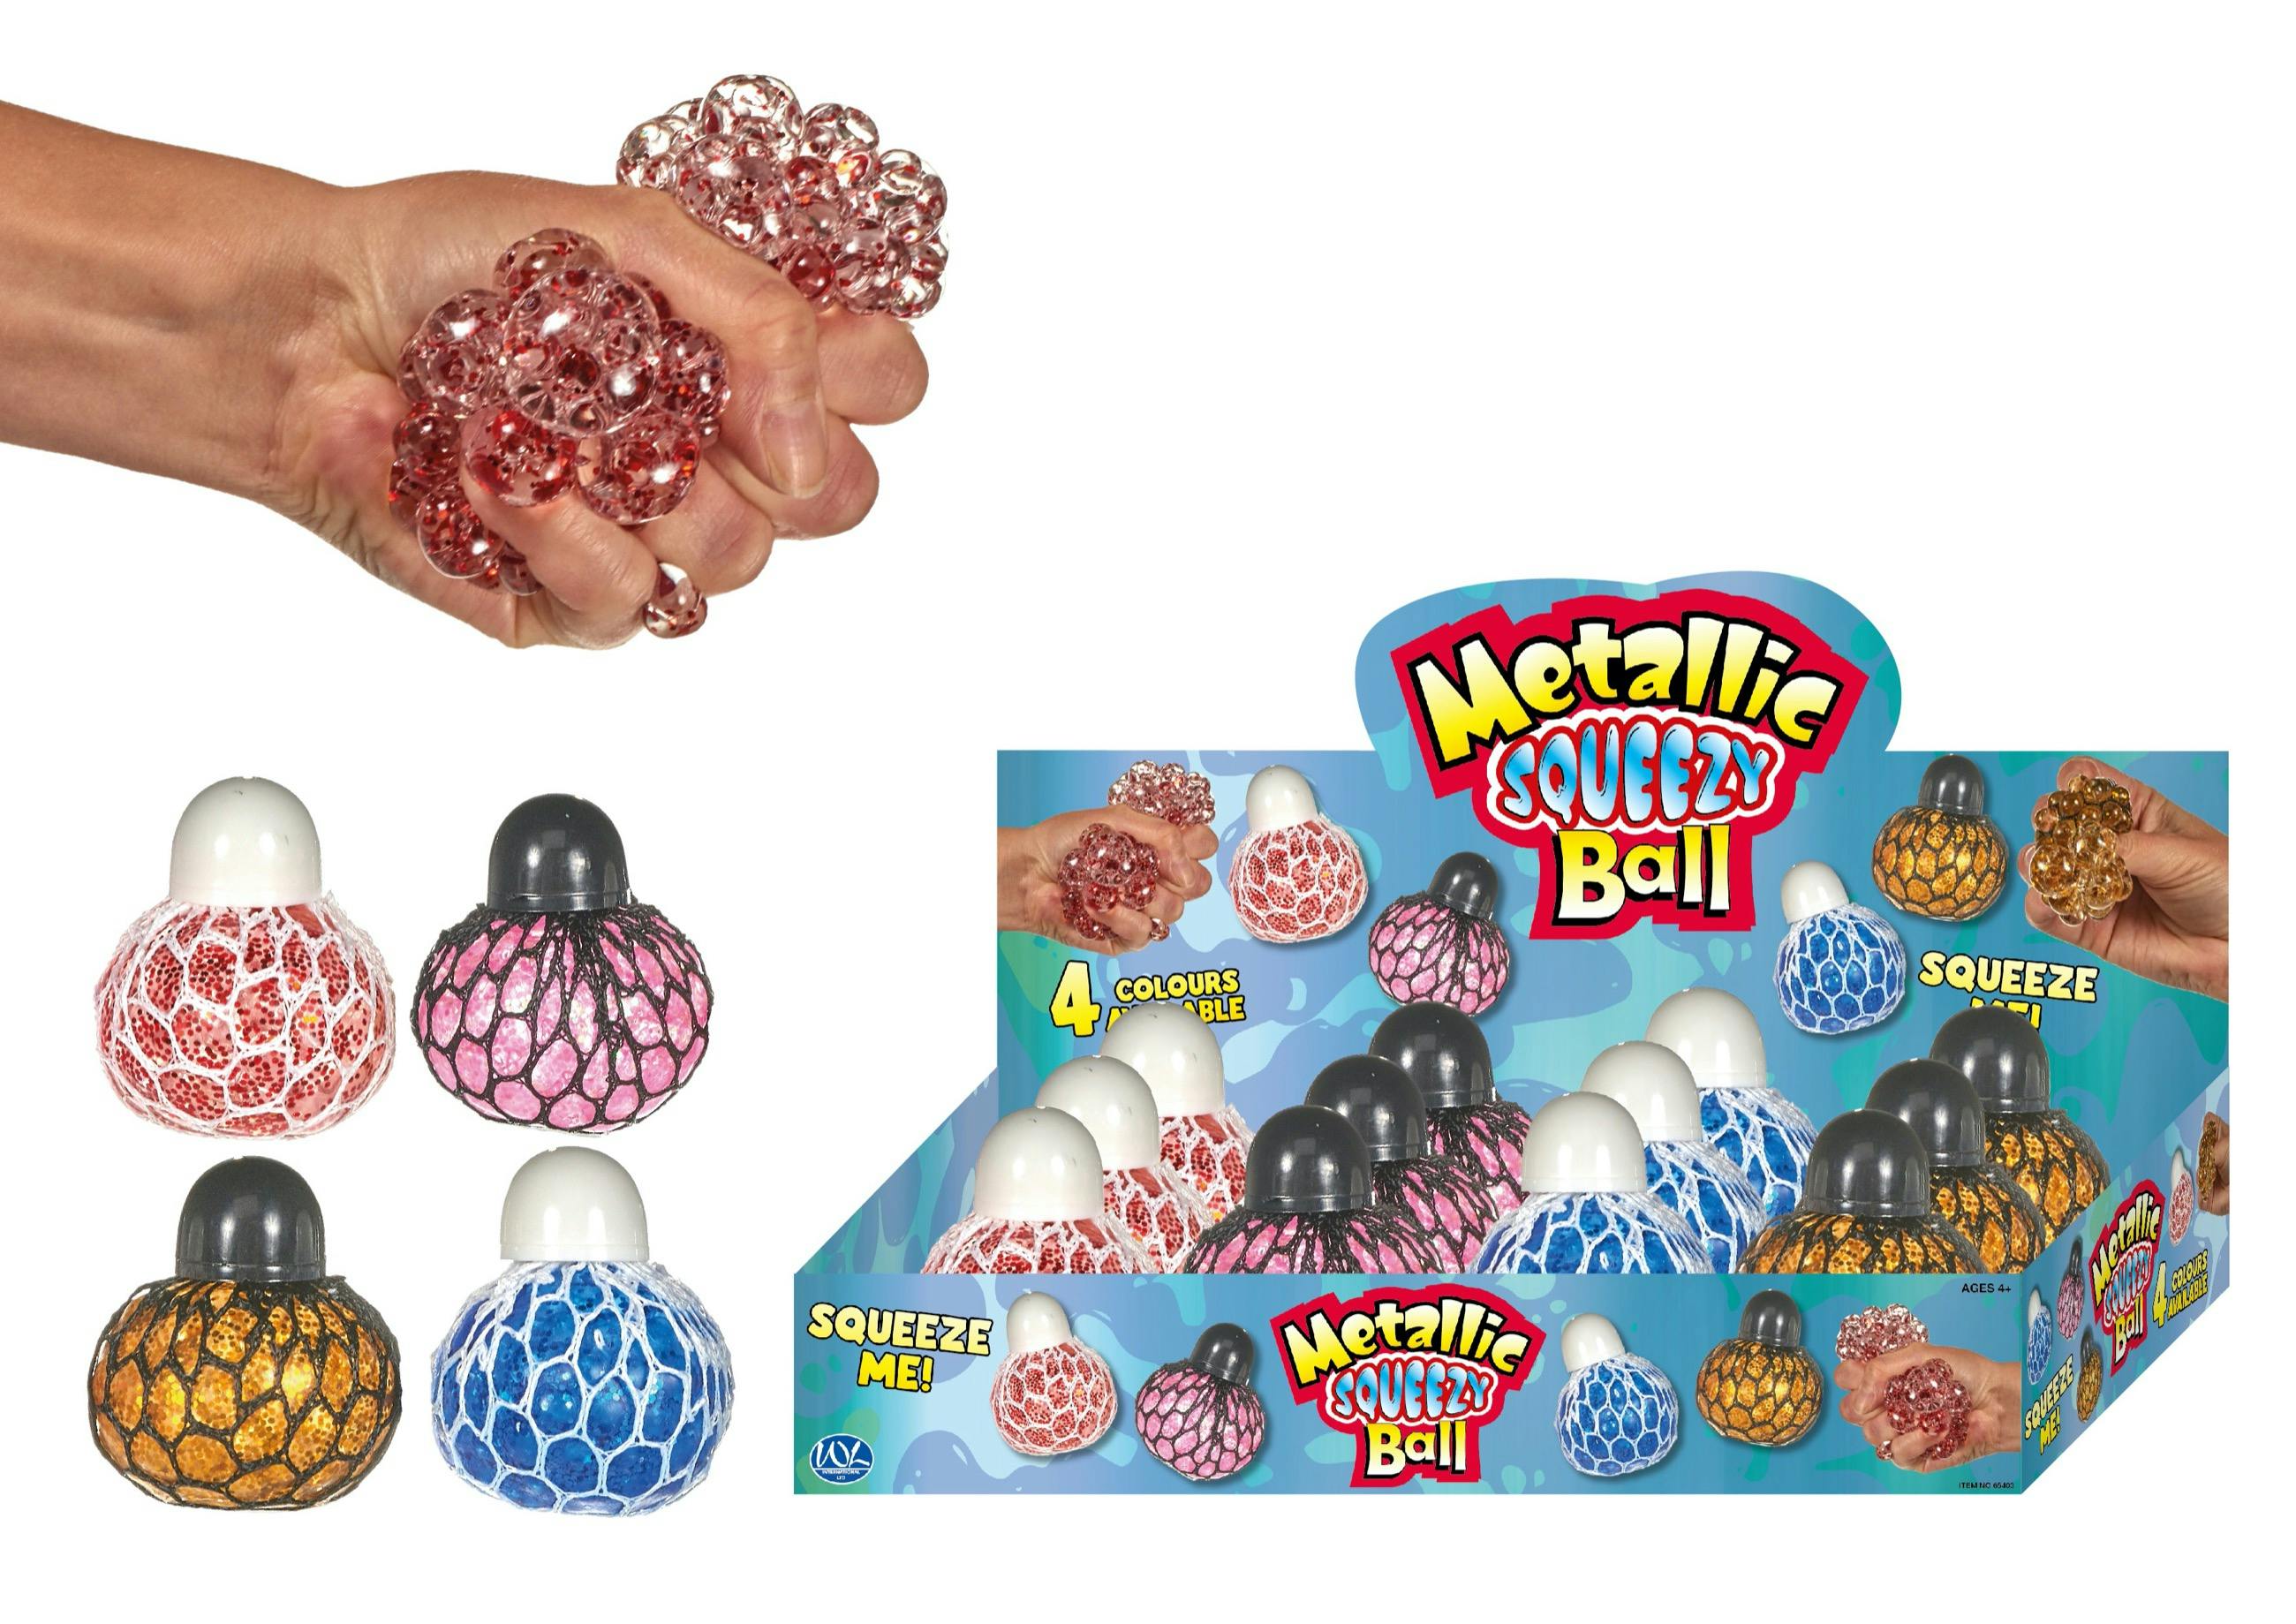 Product - Metallic Squeezy Ball